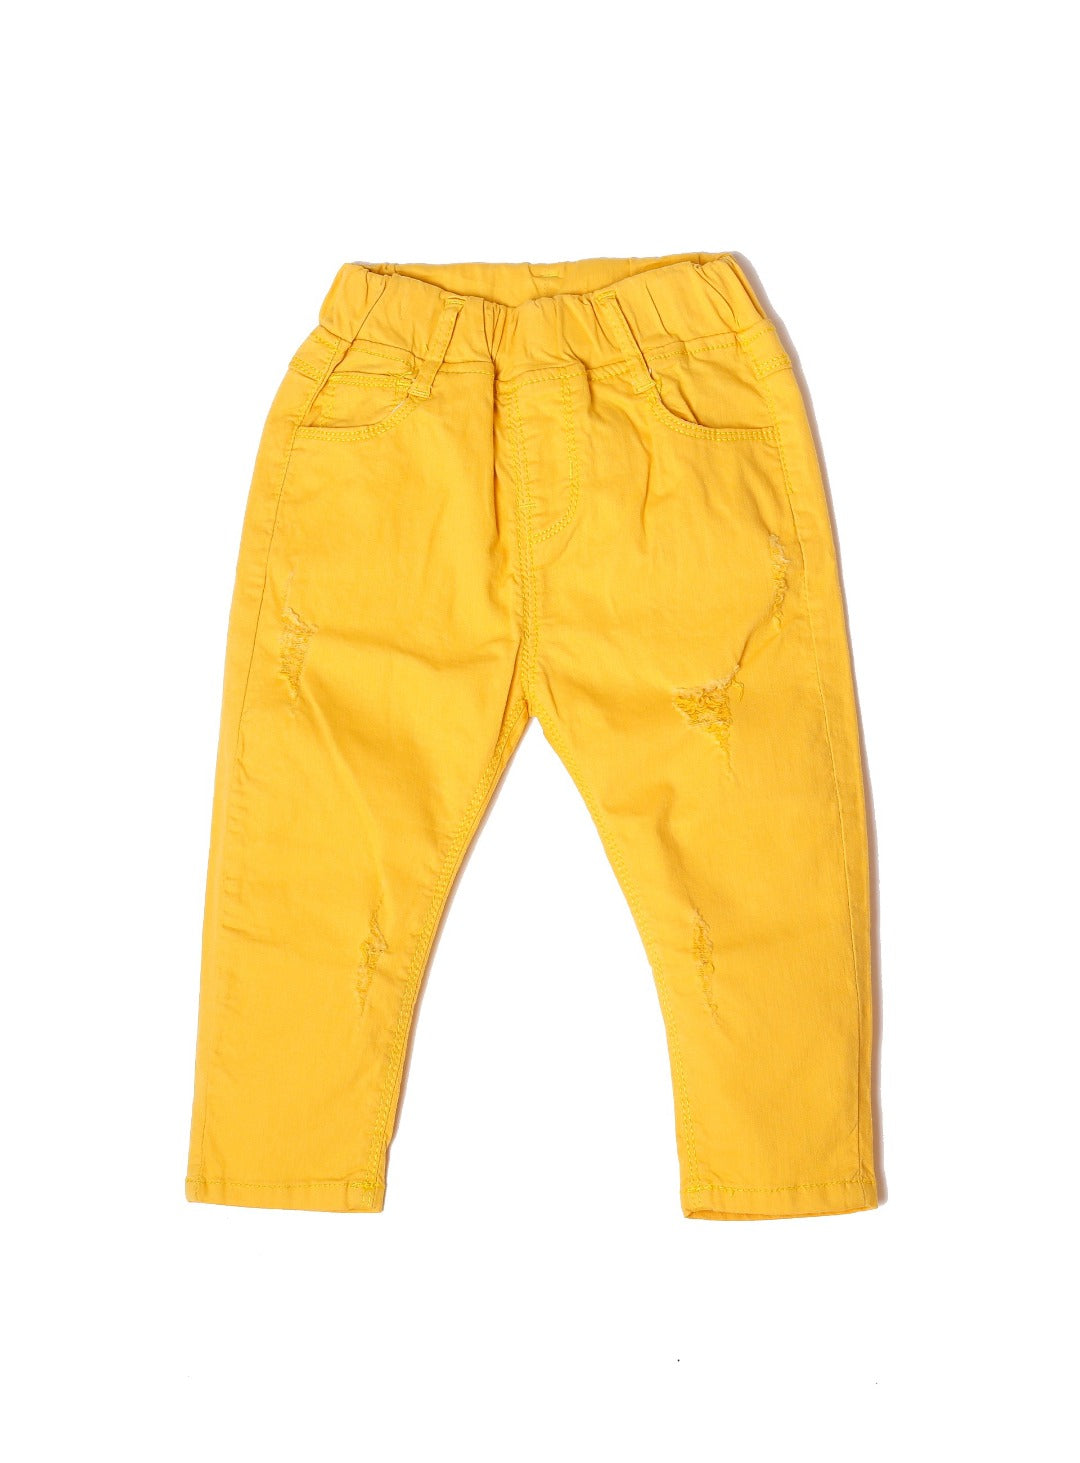 pineapple yellow long pants with ripped detail